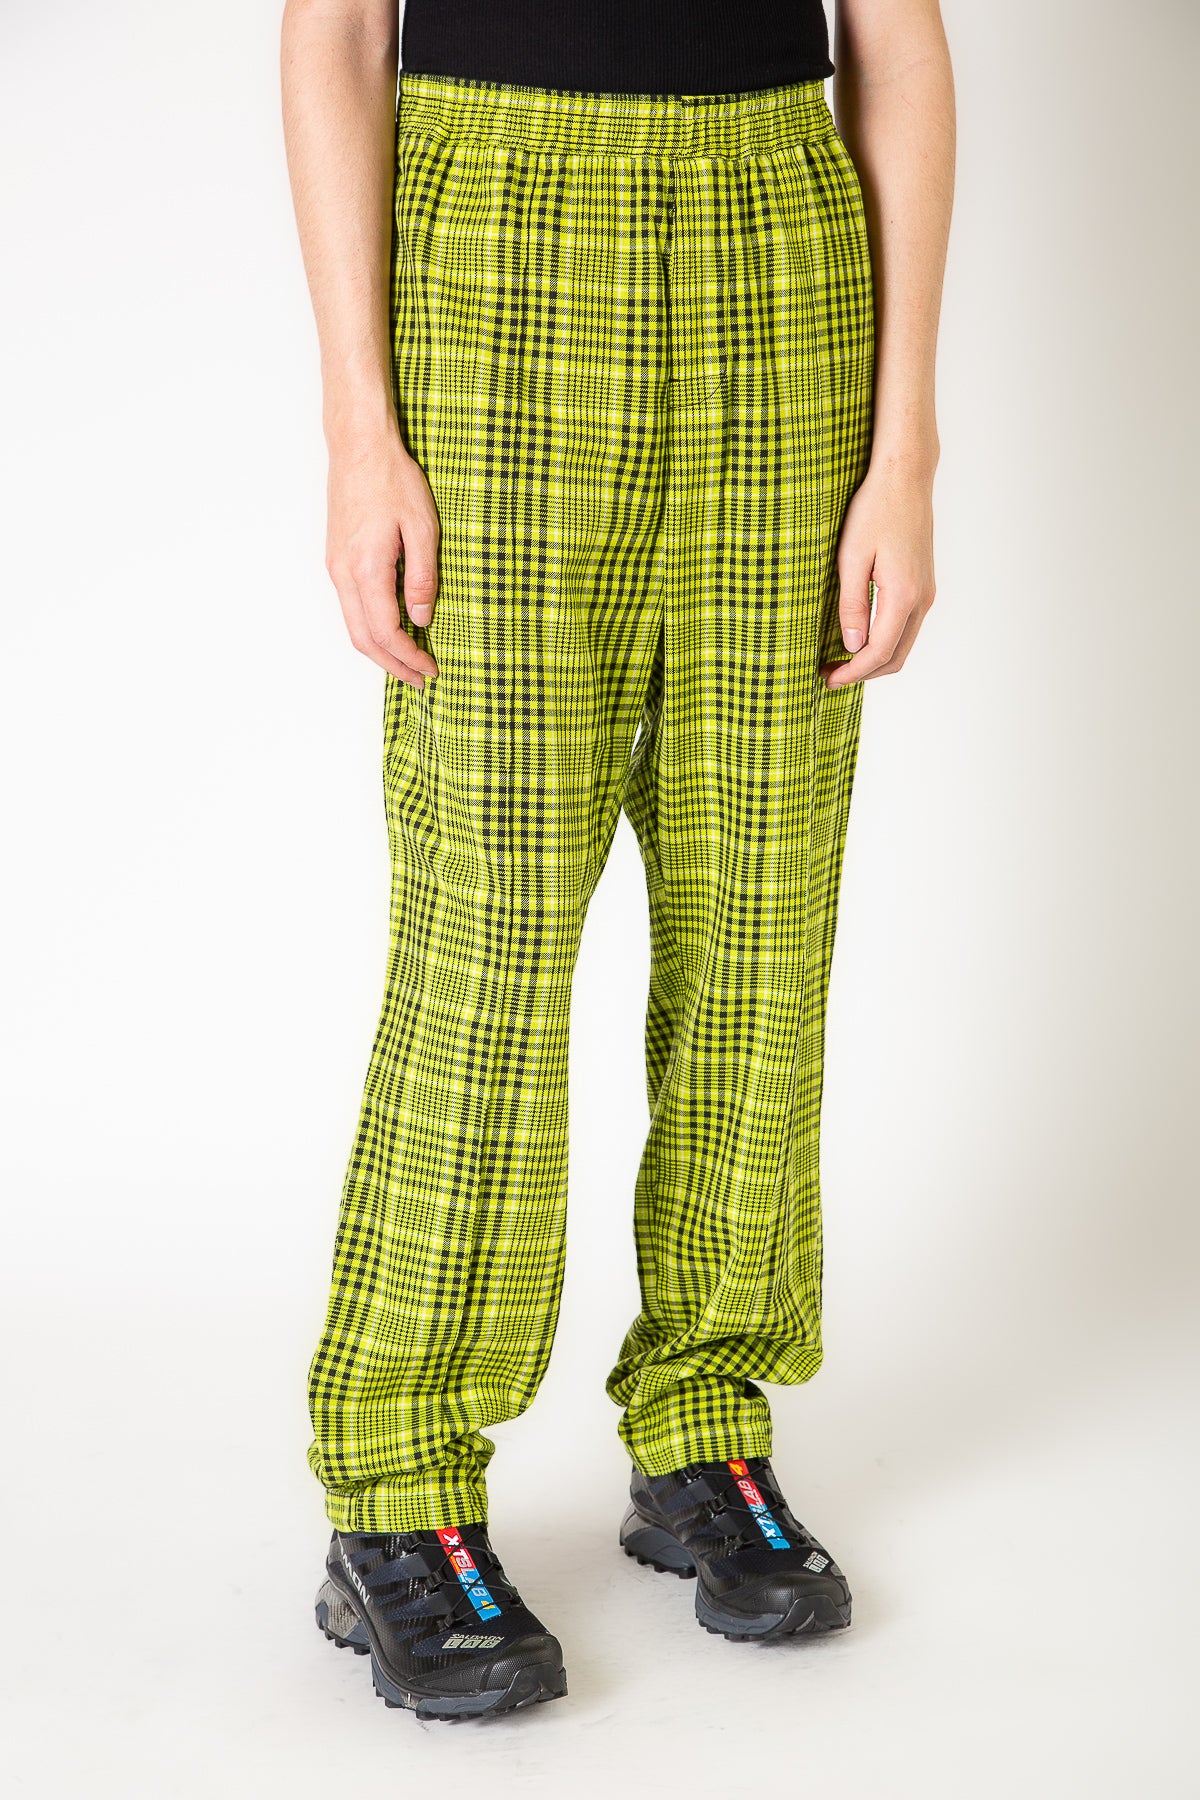 NOMA T.D. | GINGHAM CHECK EASY PANTS